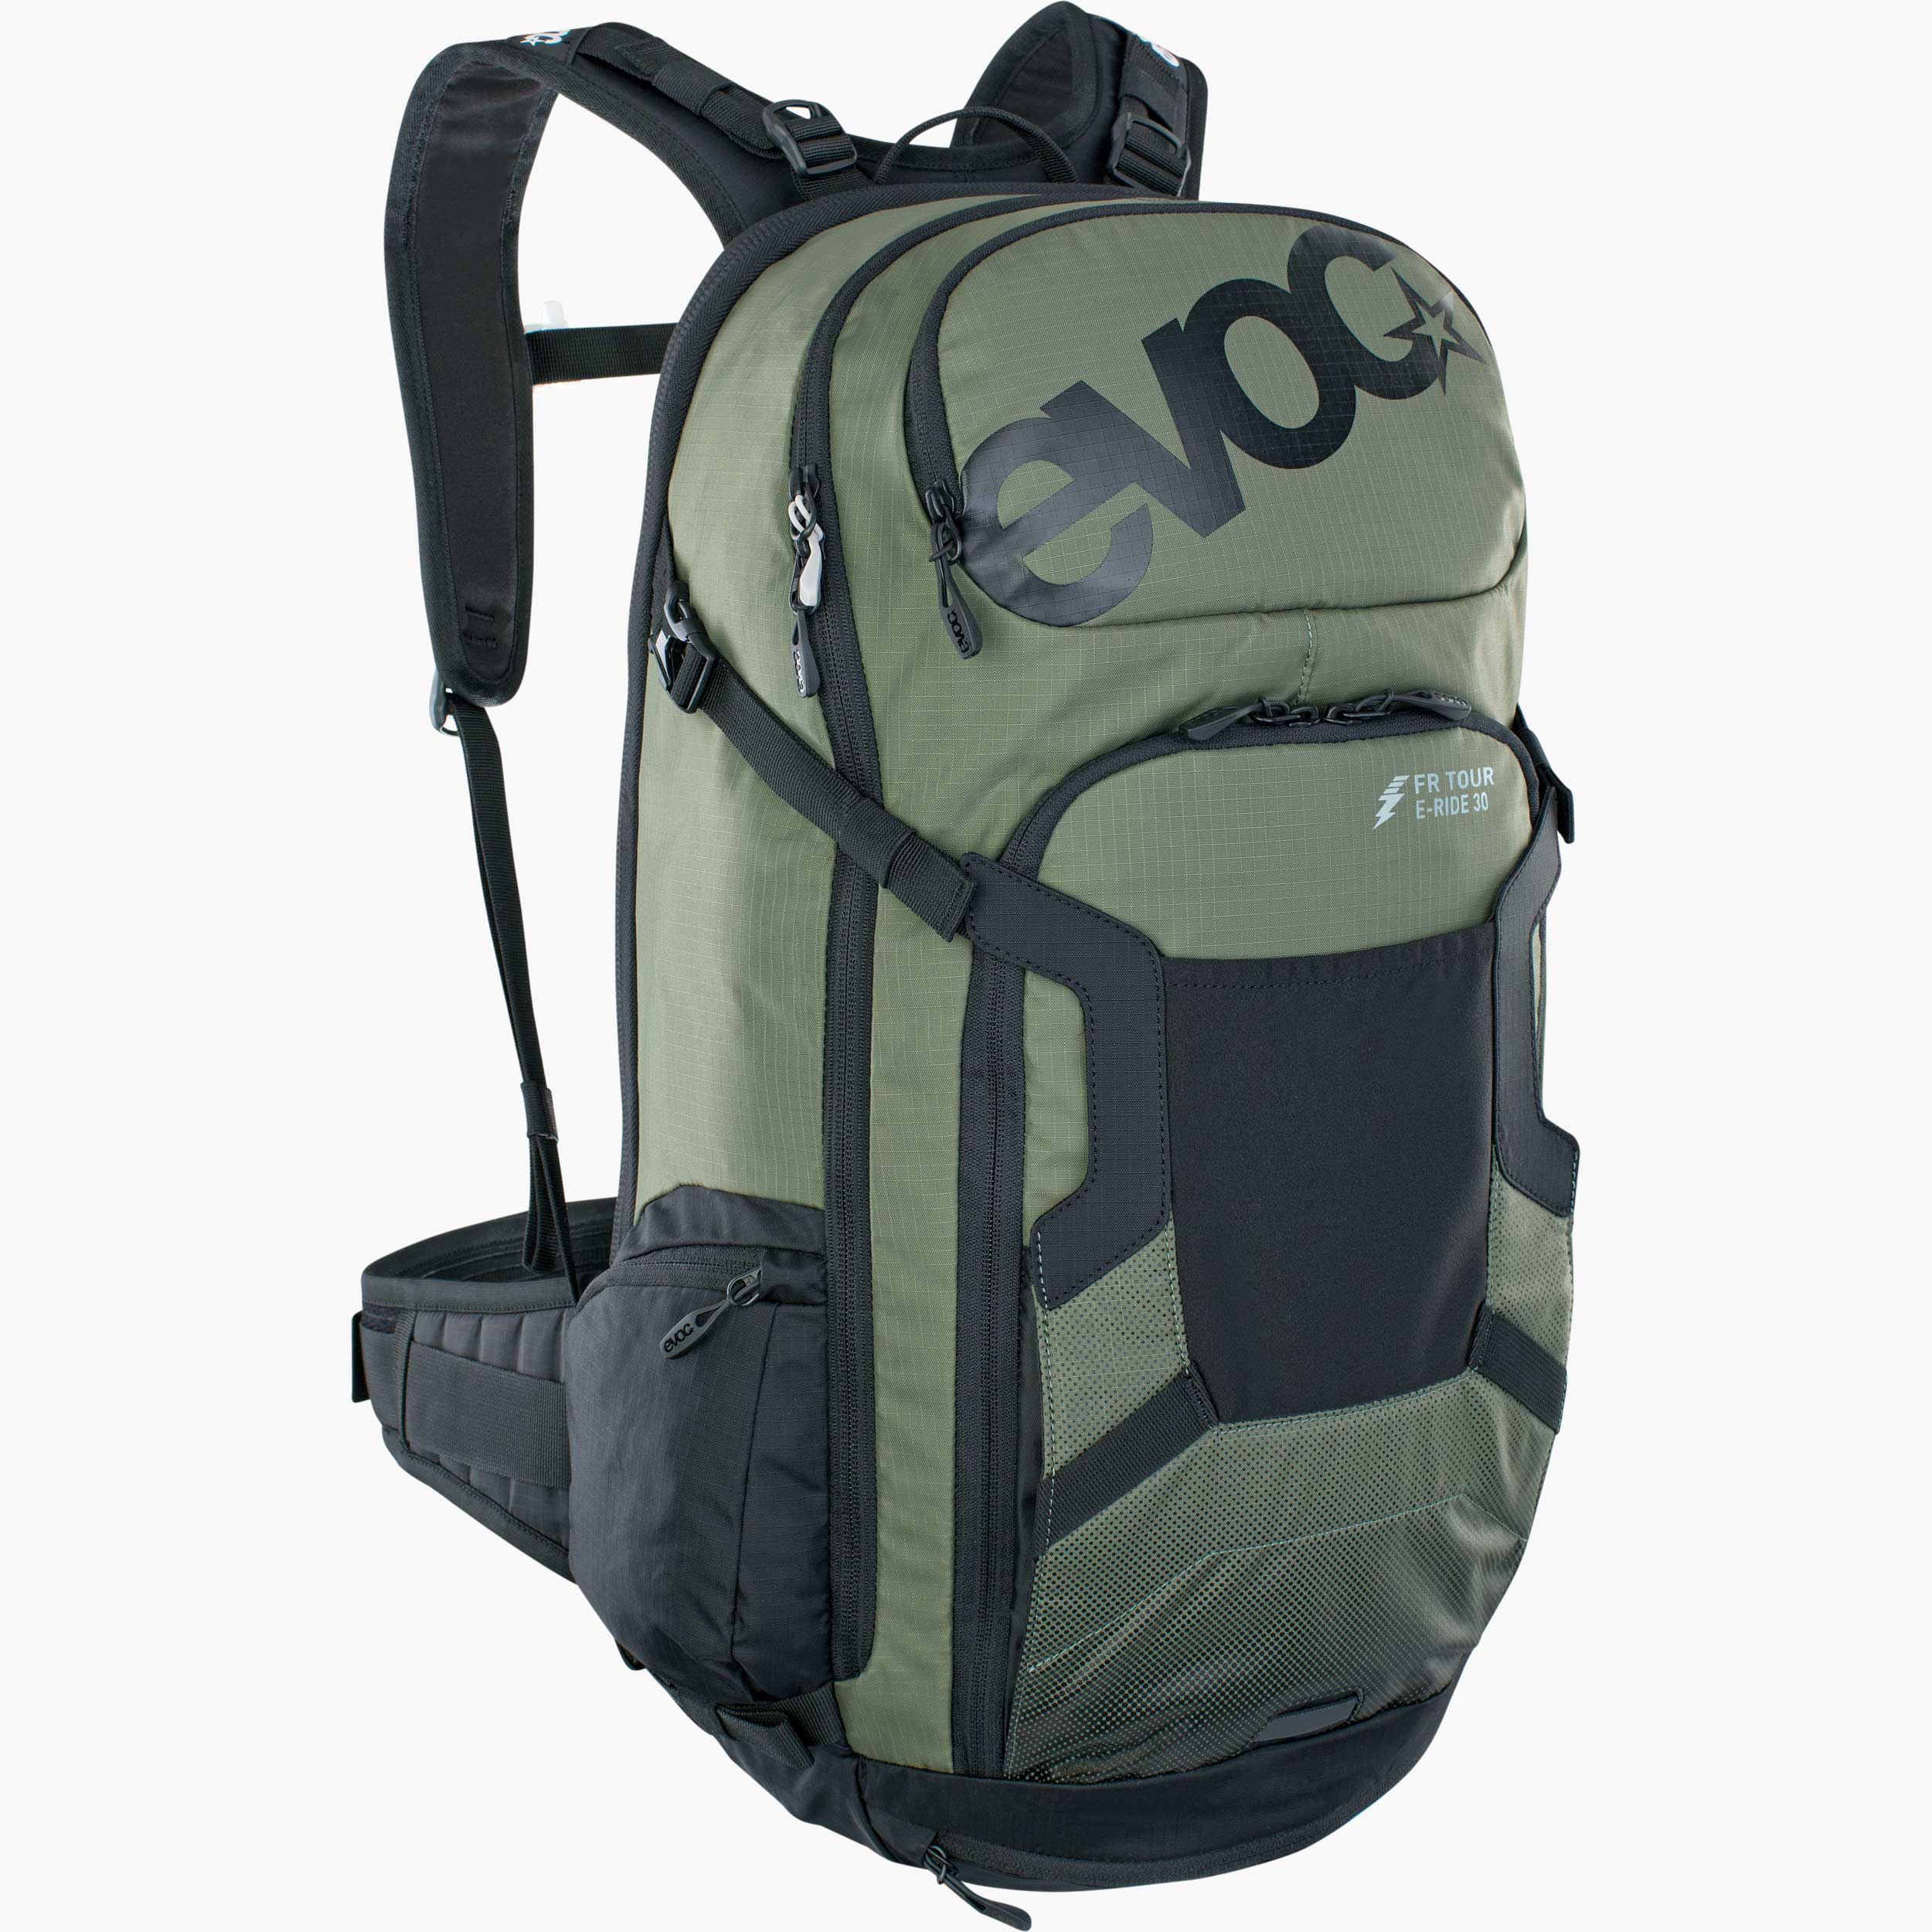 Backpack E-Bike FR Trail and-ride EVOC with space bag 